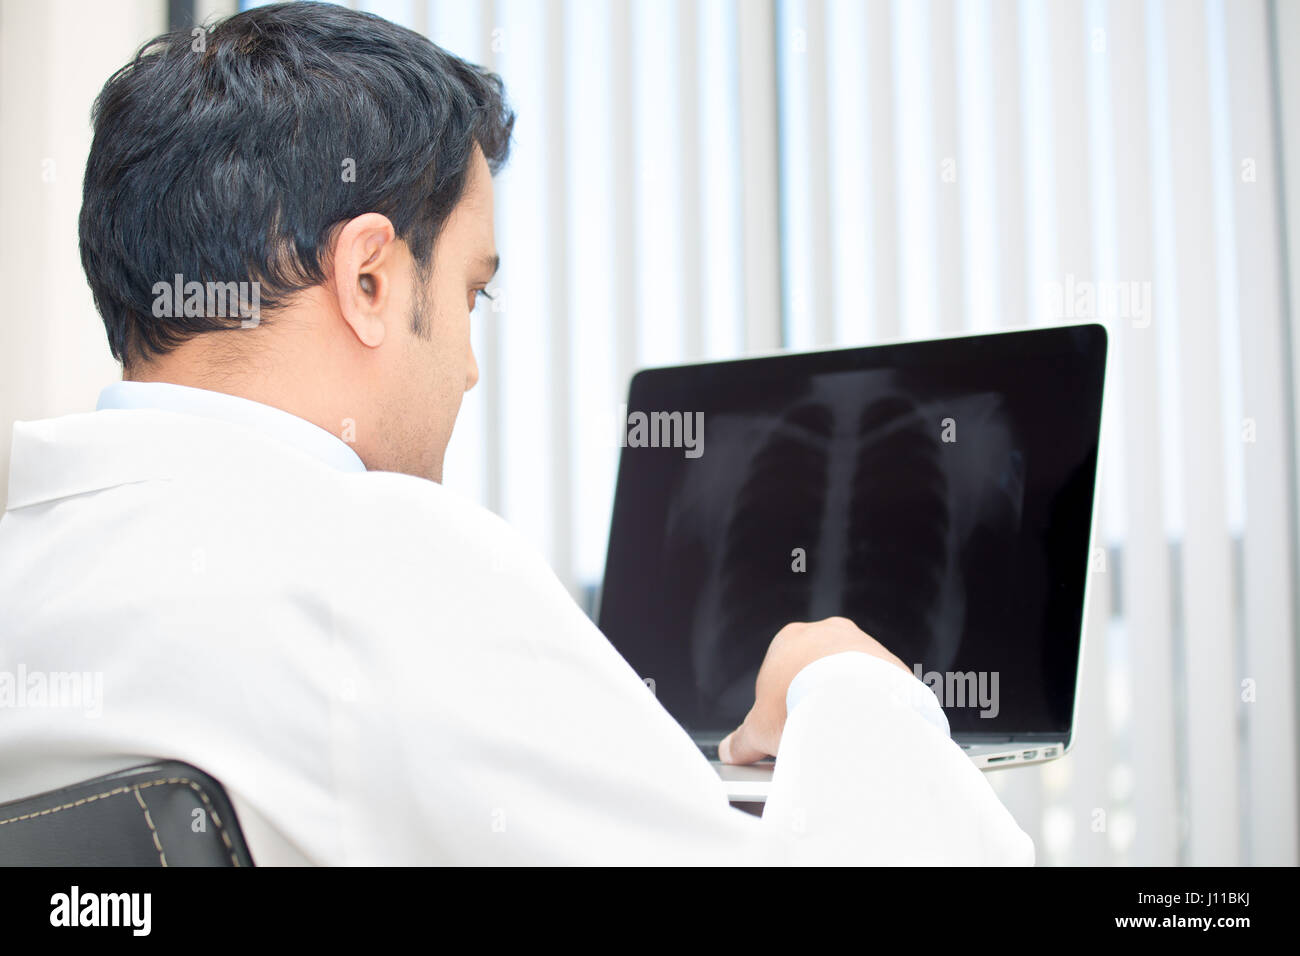 Closeup portrait of intellectual man healthcare personnel with white labcoat, looking at chest x-ray radiographic image, on laptop isolated hospital c Stock Photo